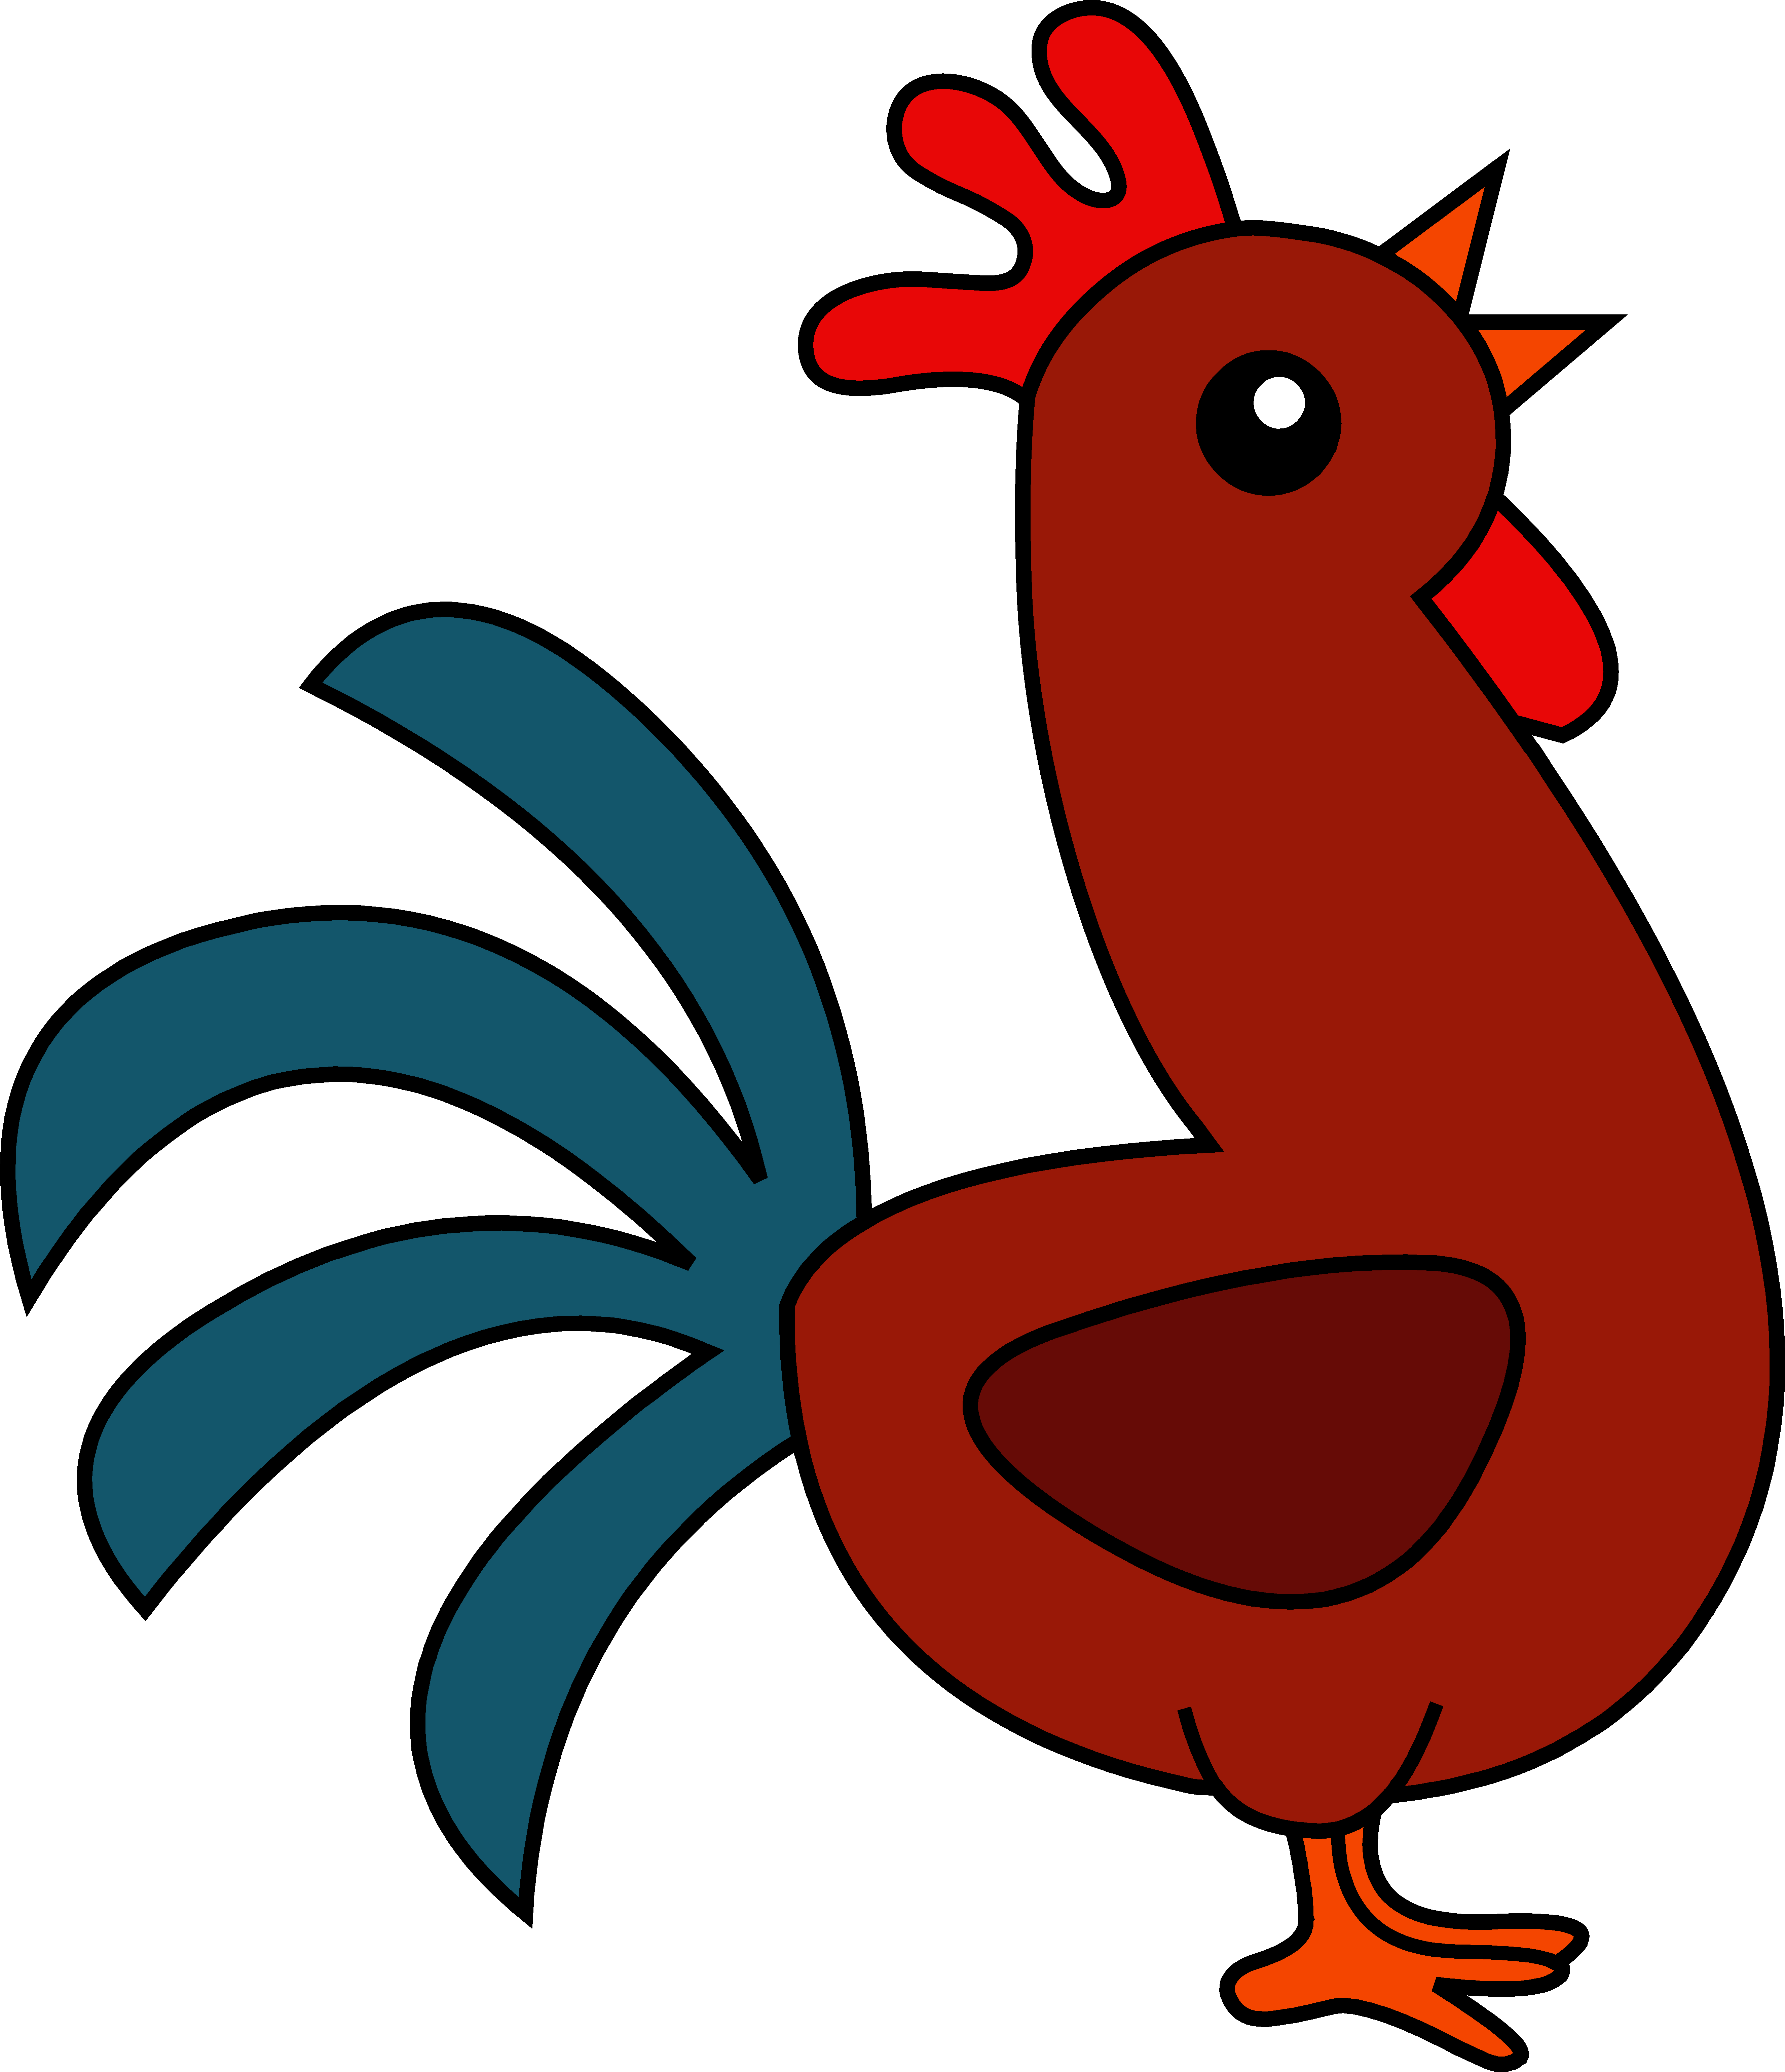 Rooster free clip art clipart